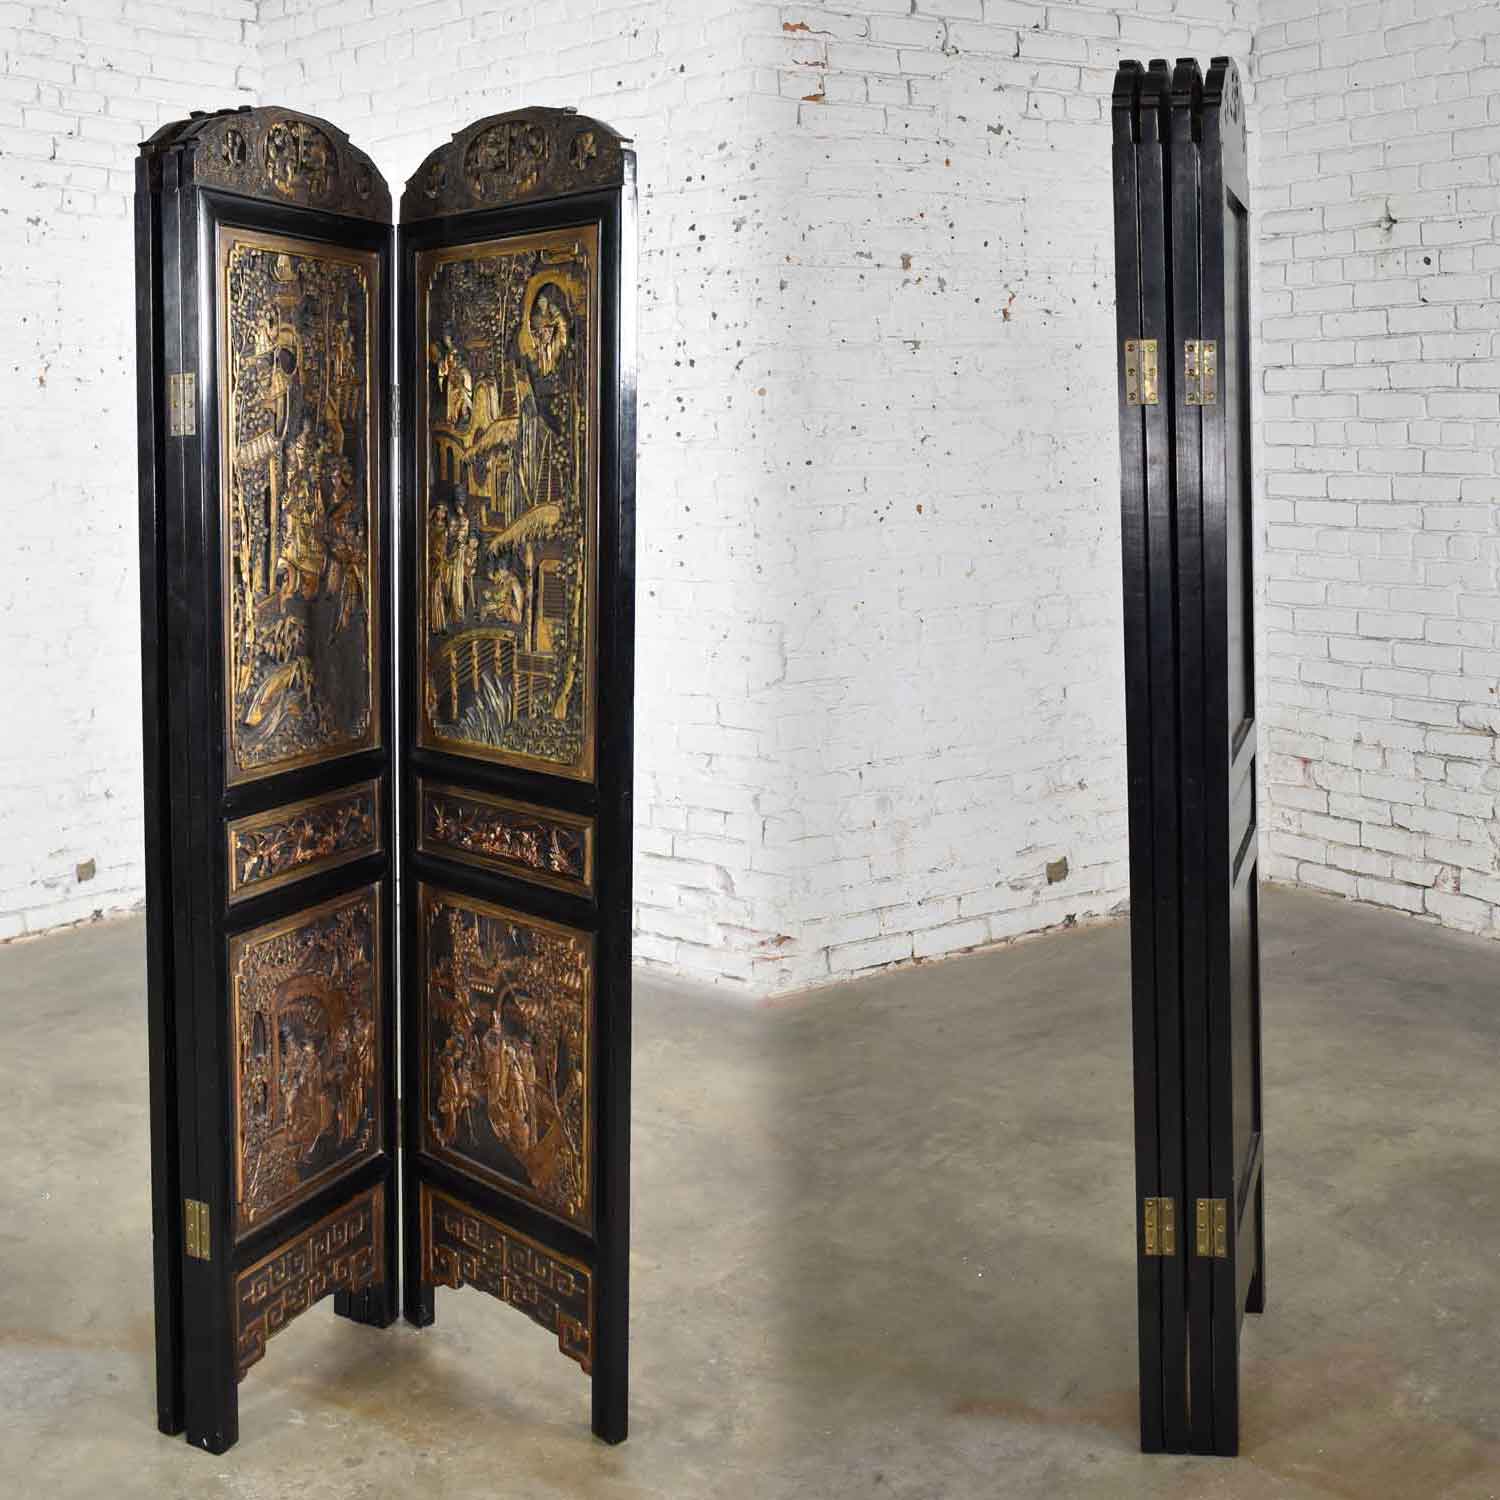 Vintage Asian Hand Carved 4 Panel Folding Screen or Room Divider Lacquered & Gilded